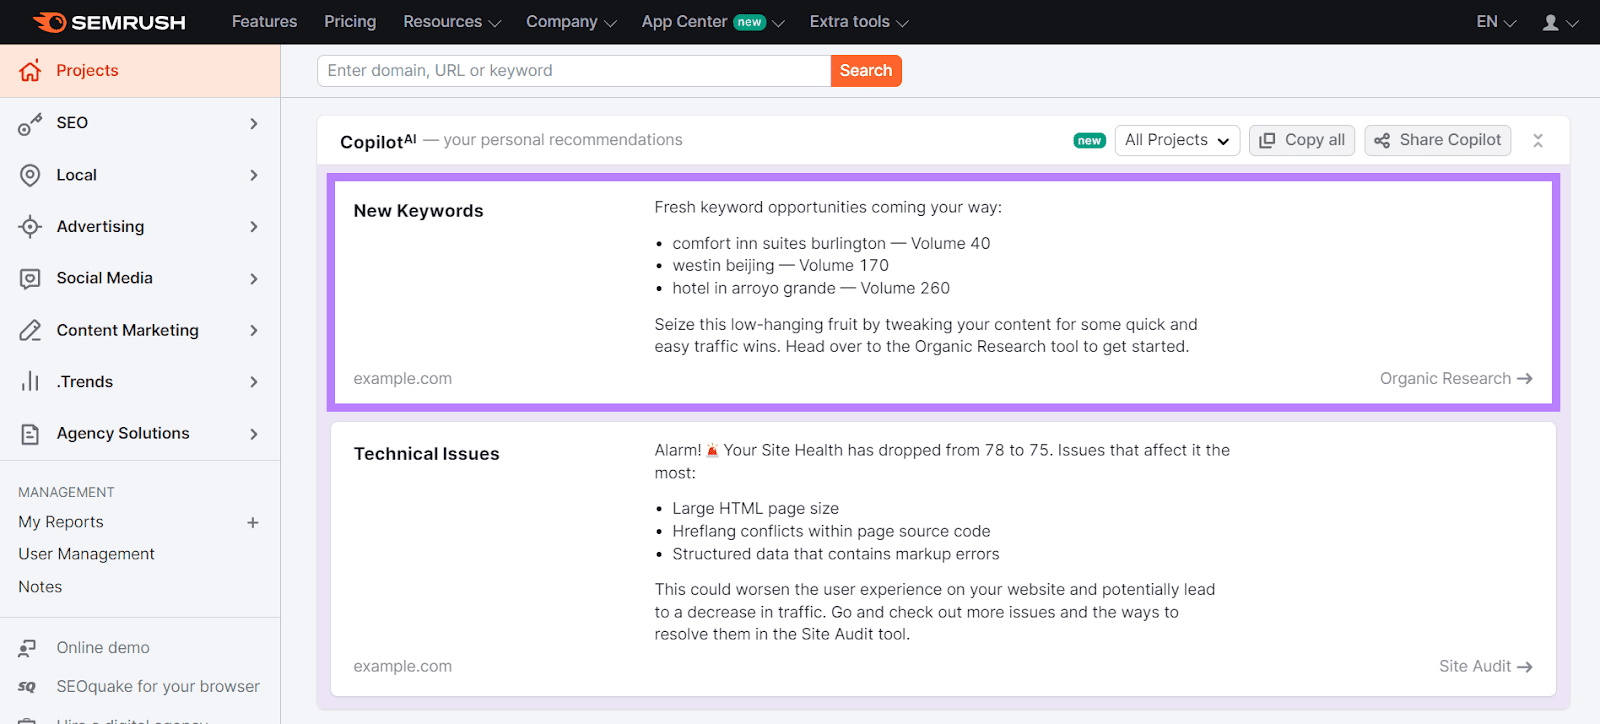 Semrush AI Copilot recommendations in account dashboard with New Keywords section highlighted.